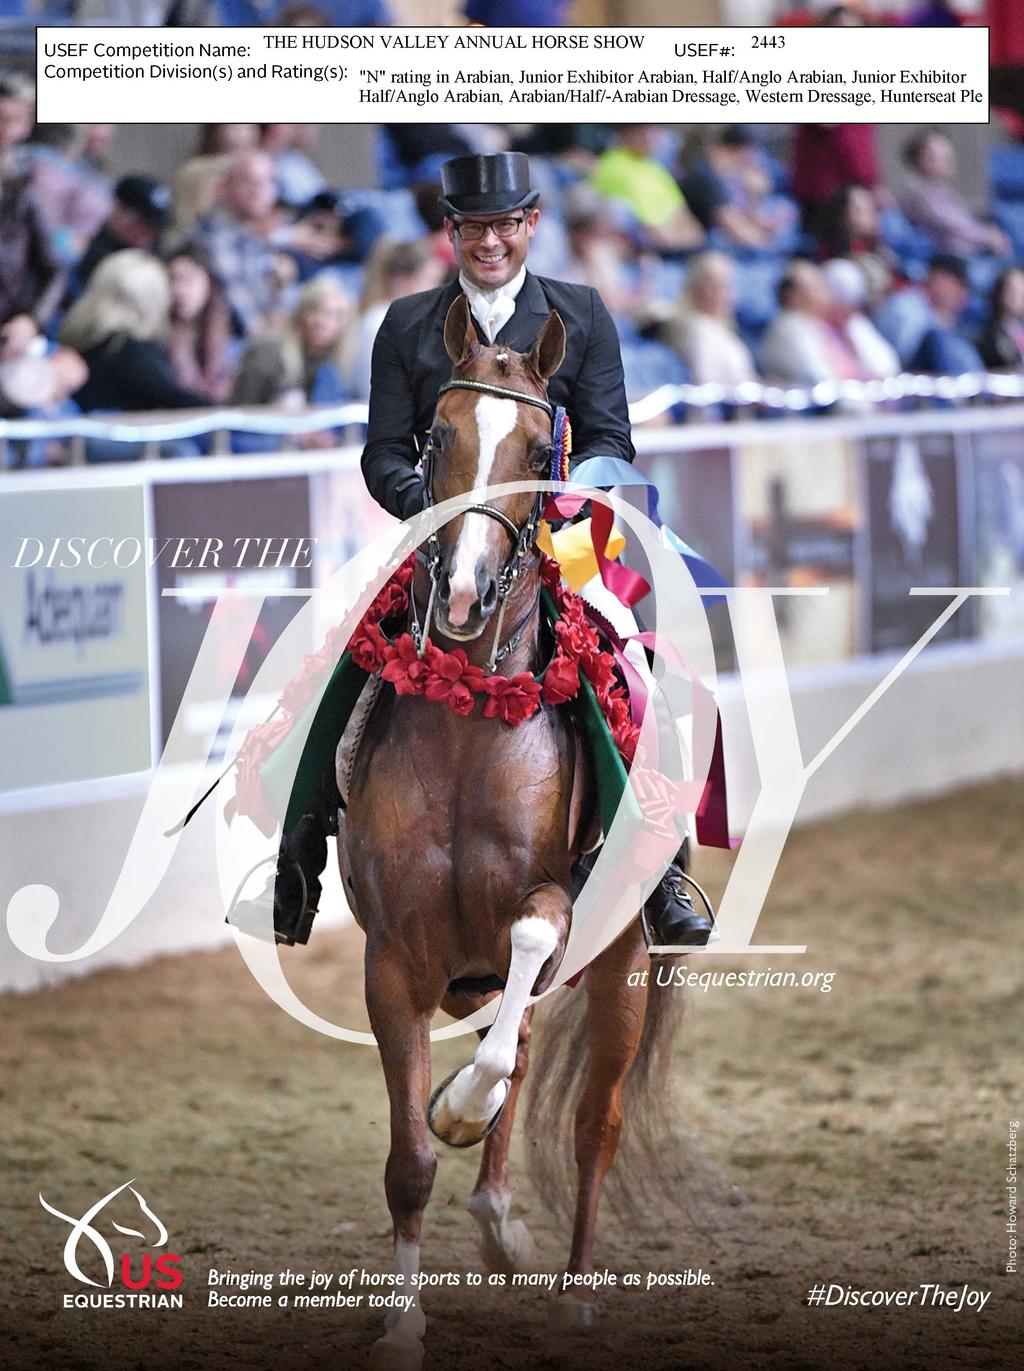 HVAHA Horse Show Sponsors and Patrons [ ] Patrons $275 $ Scrumptious snacks and goodies delivered daily A Championship Class Sponsorship Ad on our web site for one year Quarter page ad in our